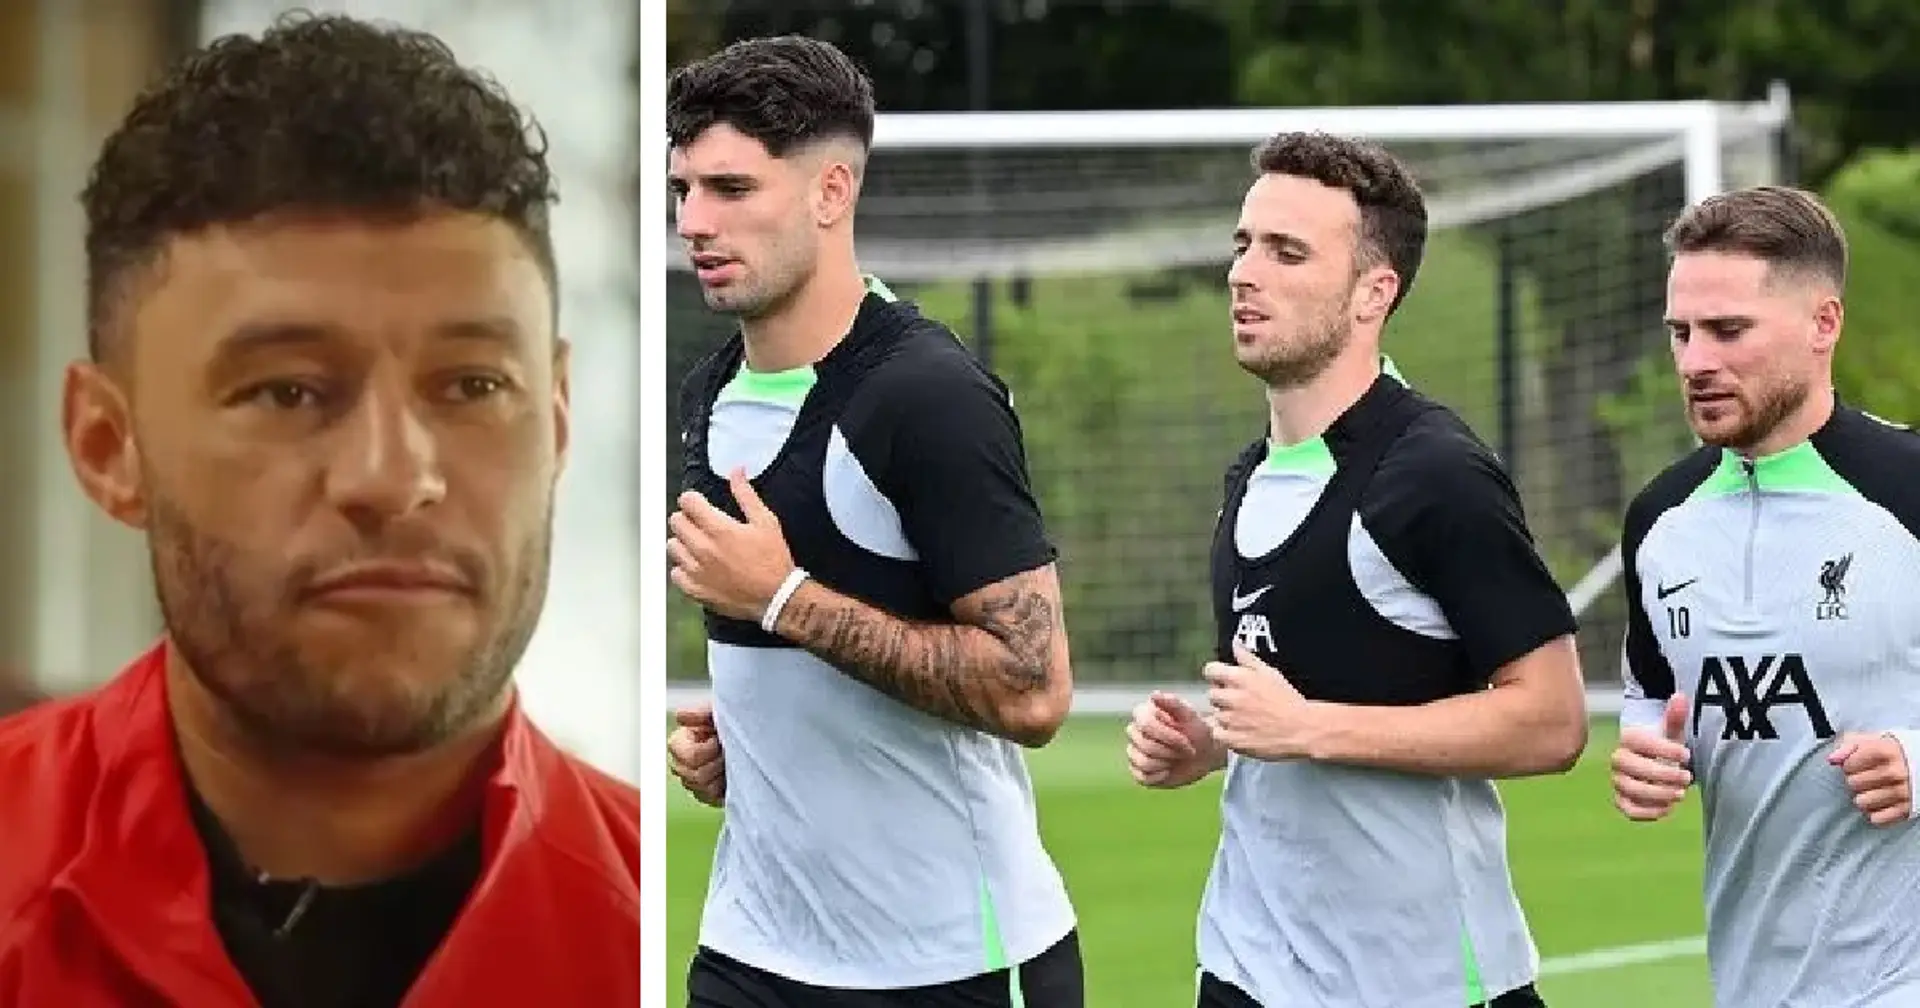 'Trent tells me how good he is': Oxlade-Chamberlain says he enjoys watching Liverpool player